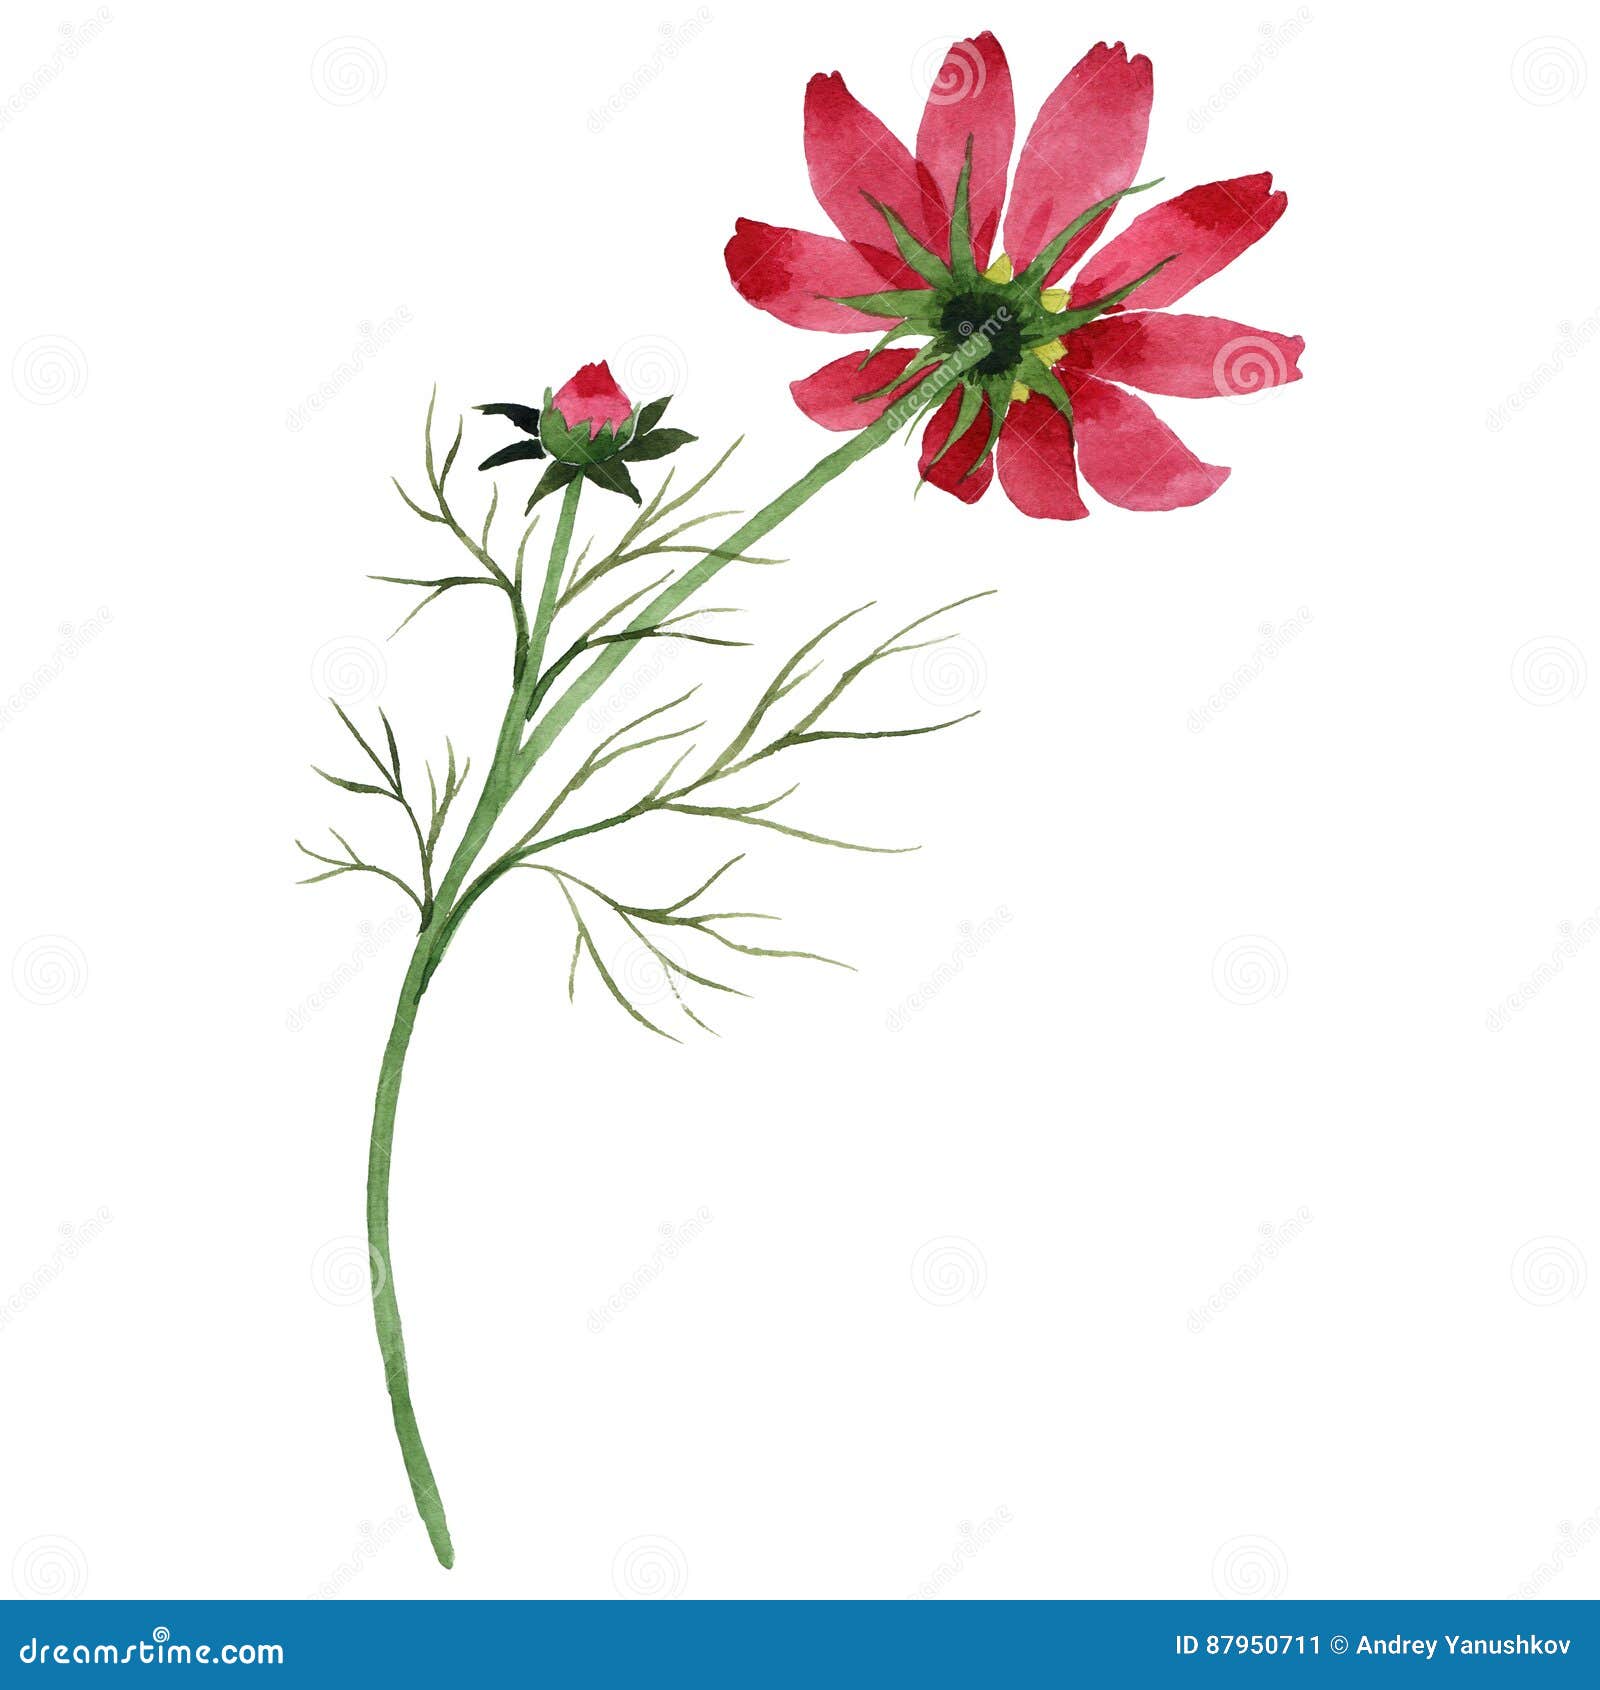 Wildflower kosmeya flower in a watercolor style isolated. Full name of the plant: kosmeya. Aquarelle wild flower for background, texture, wrapper pattern, frame or border.